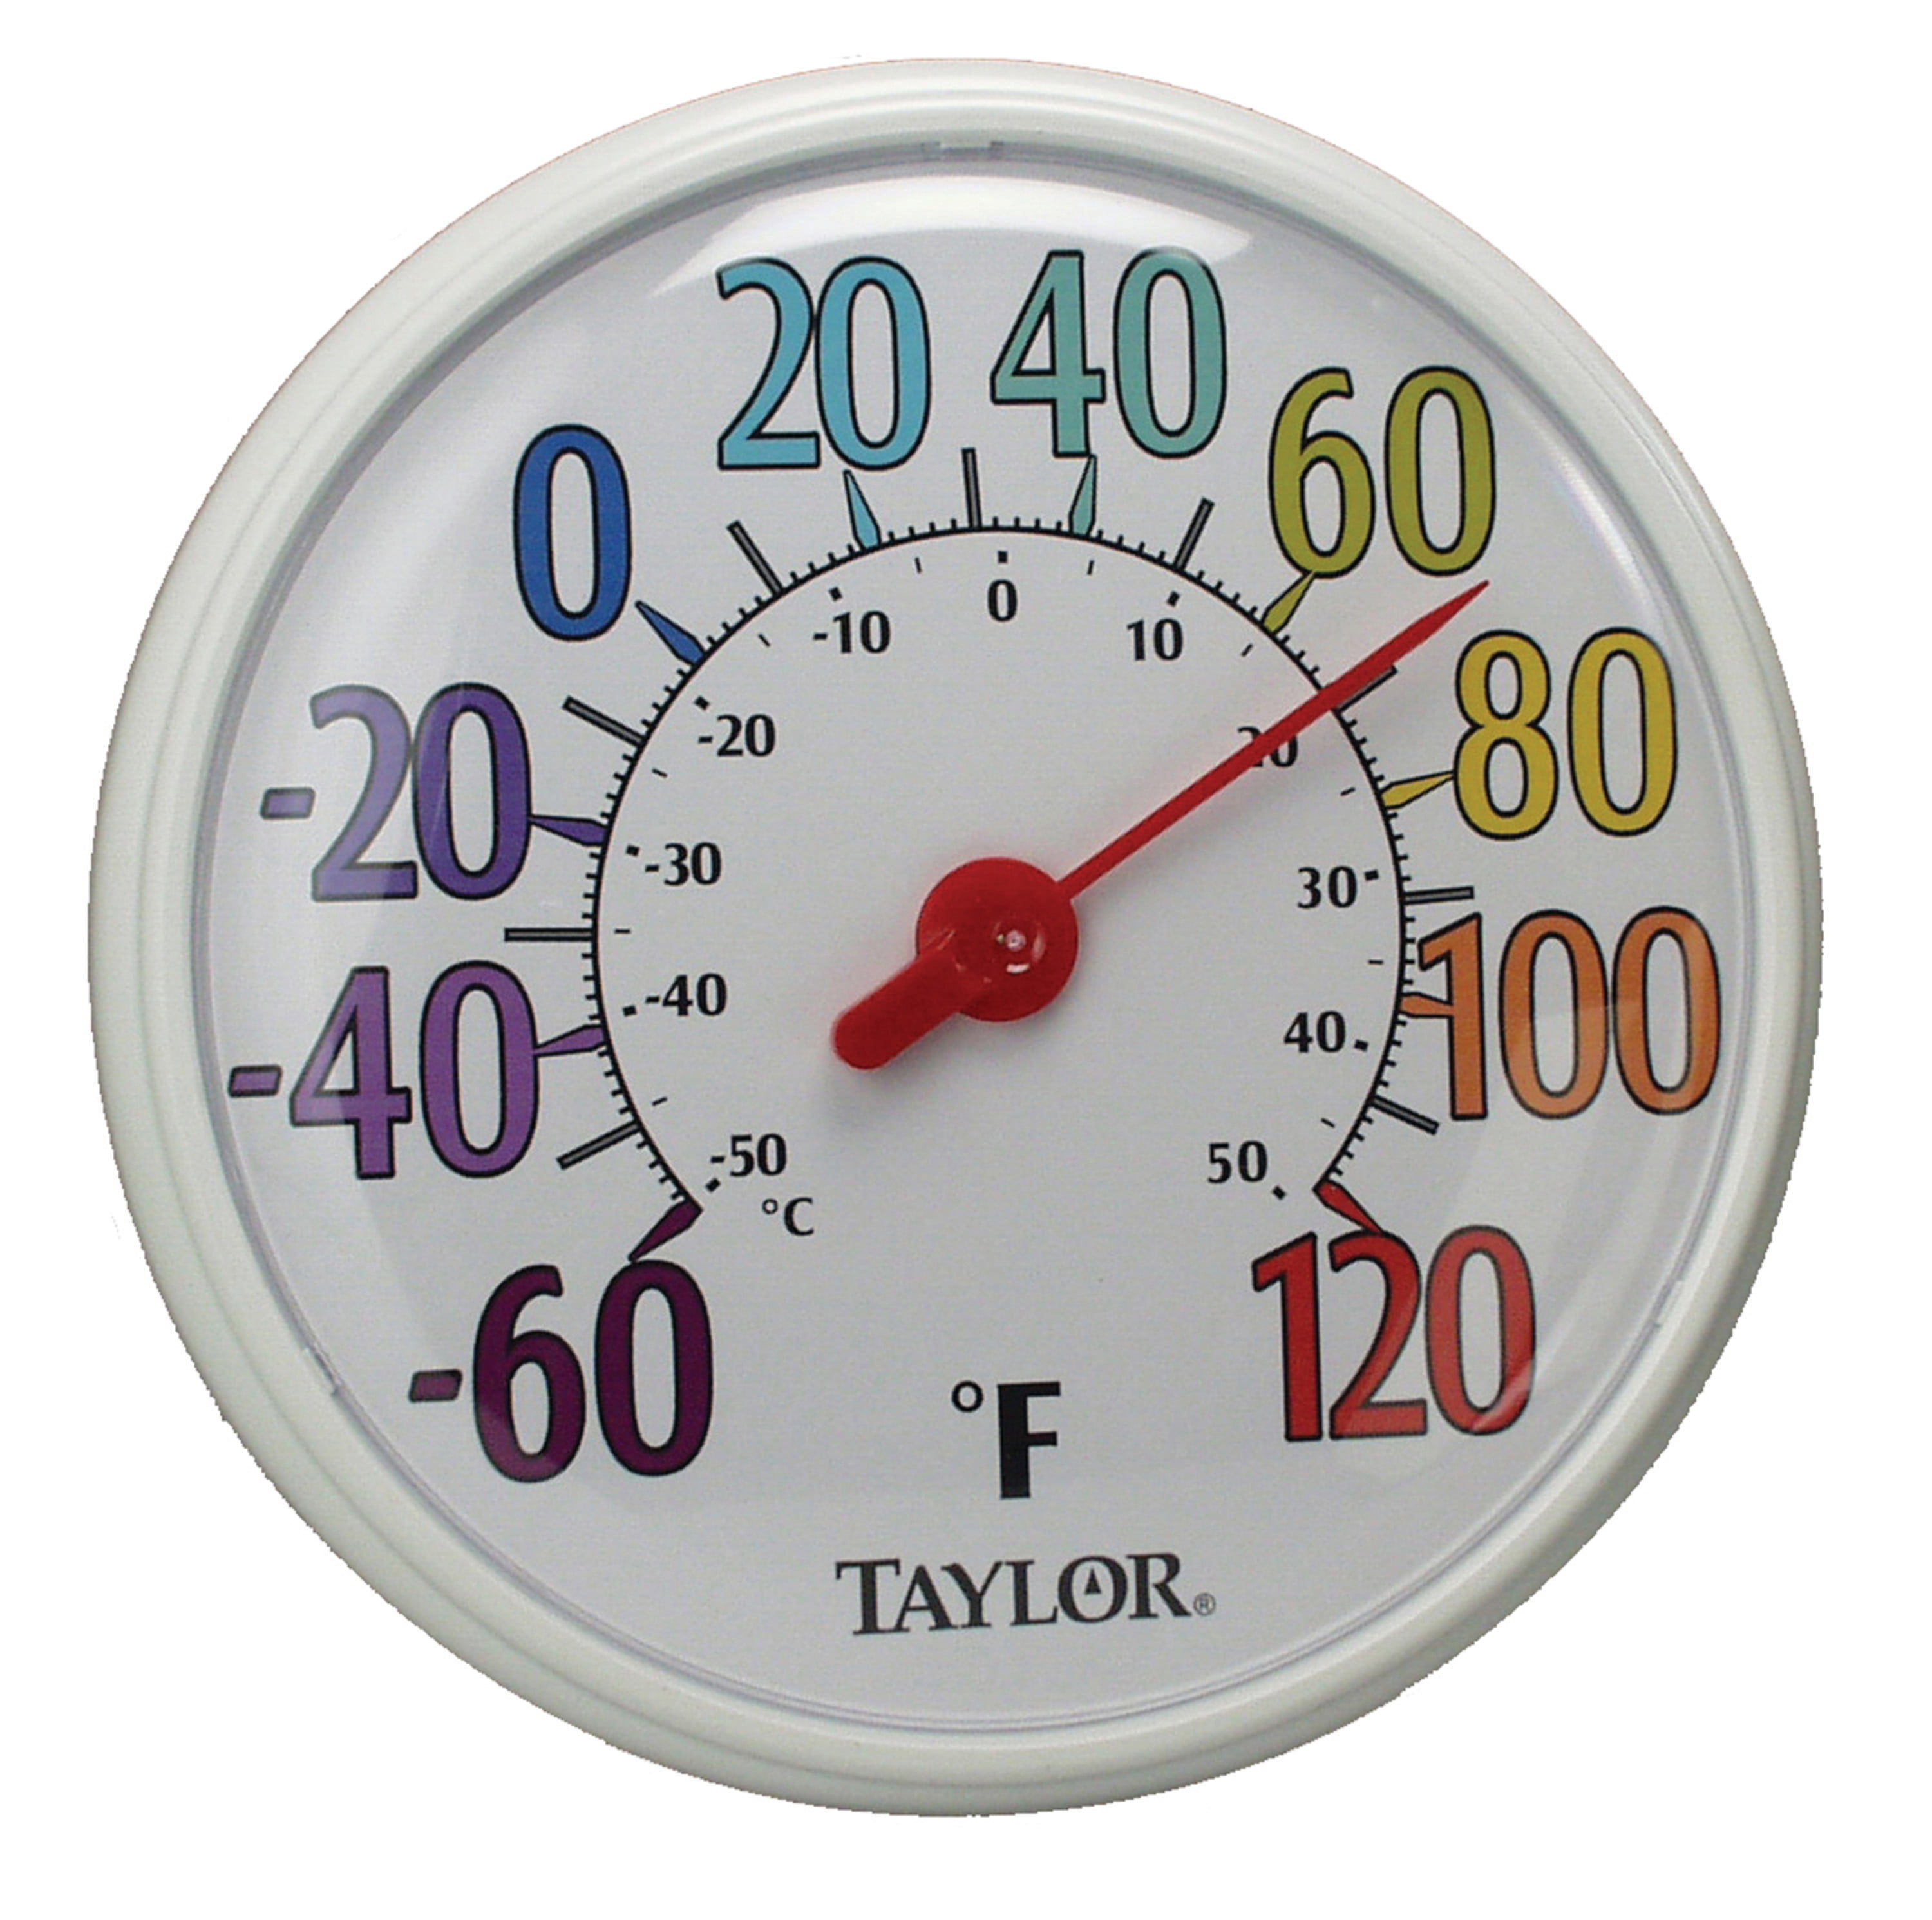 Taylor Heritage Spirit-Filled Metal Thermometer, 12.25-inch